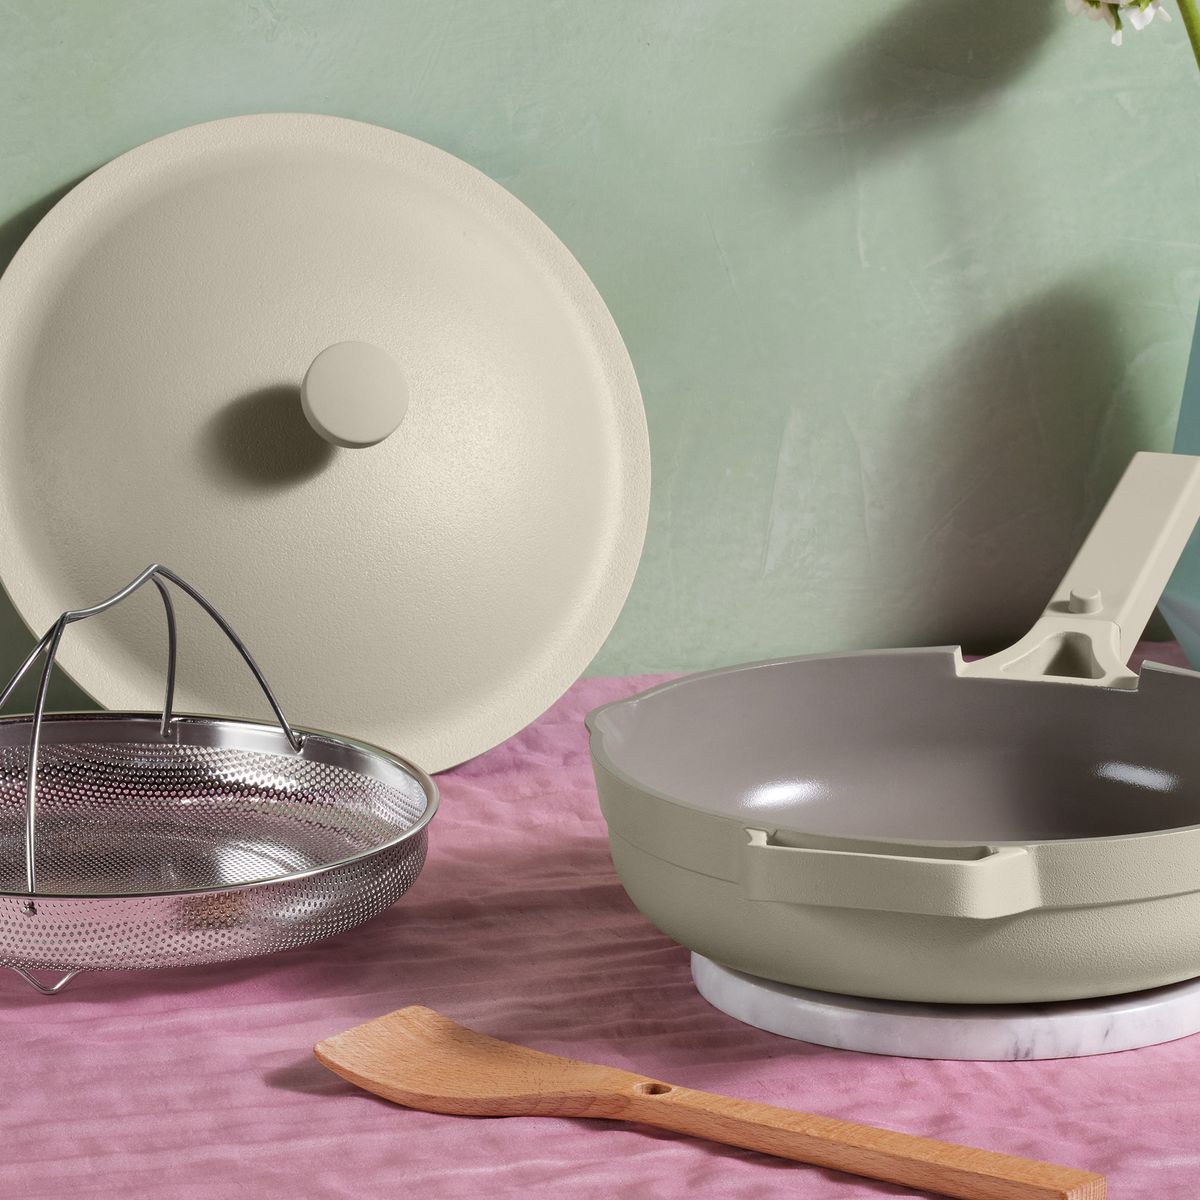 The Our Place Always Pan Is No More — Meet the Always Pan 2.0